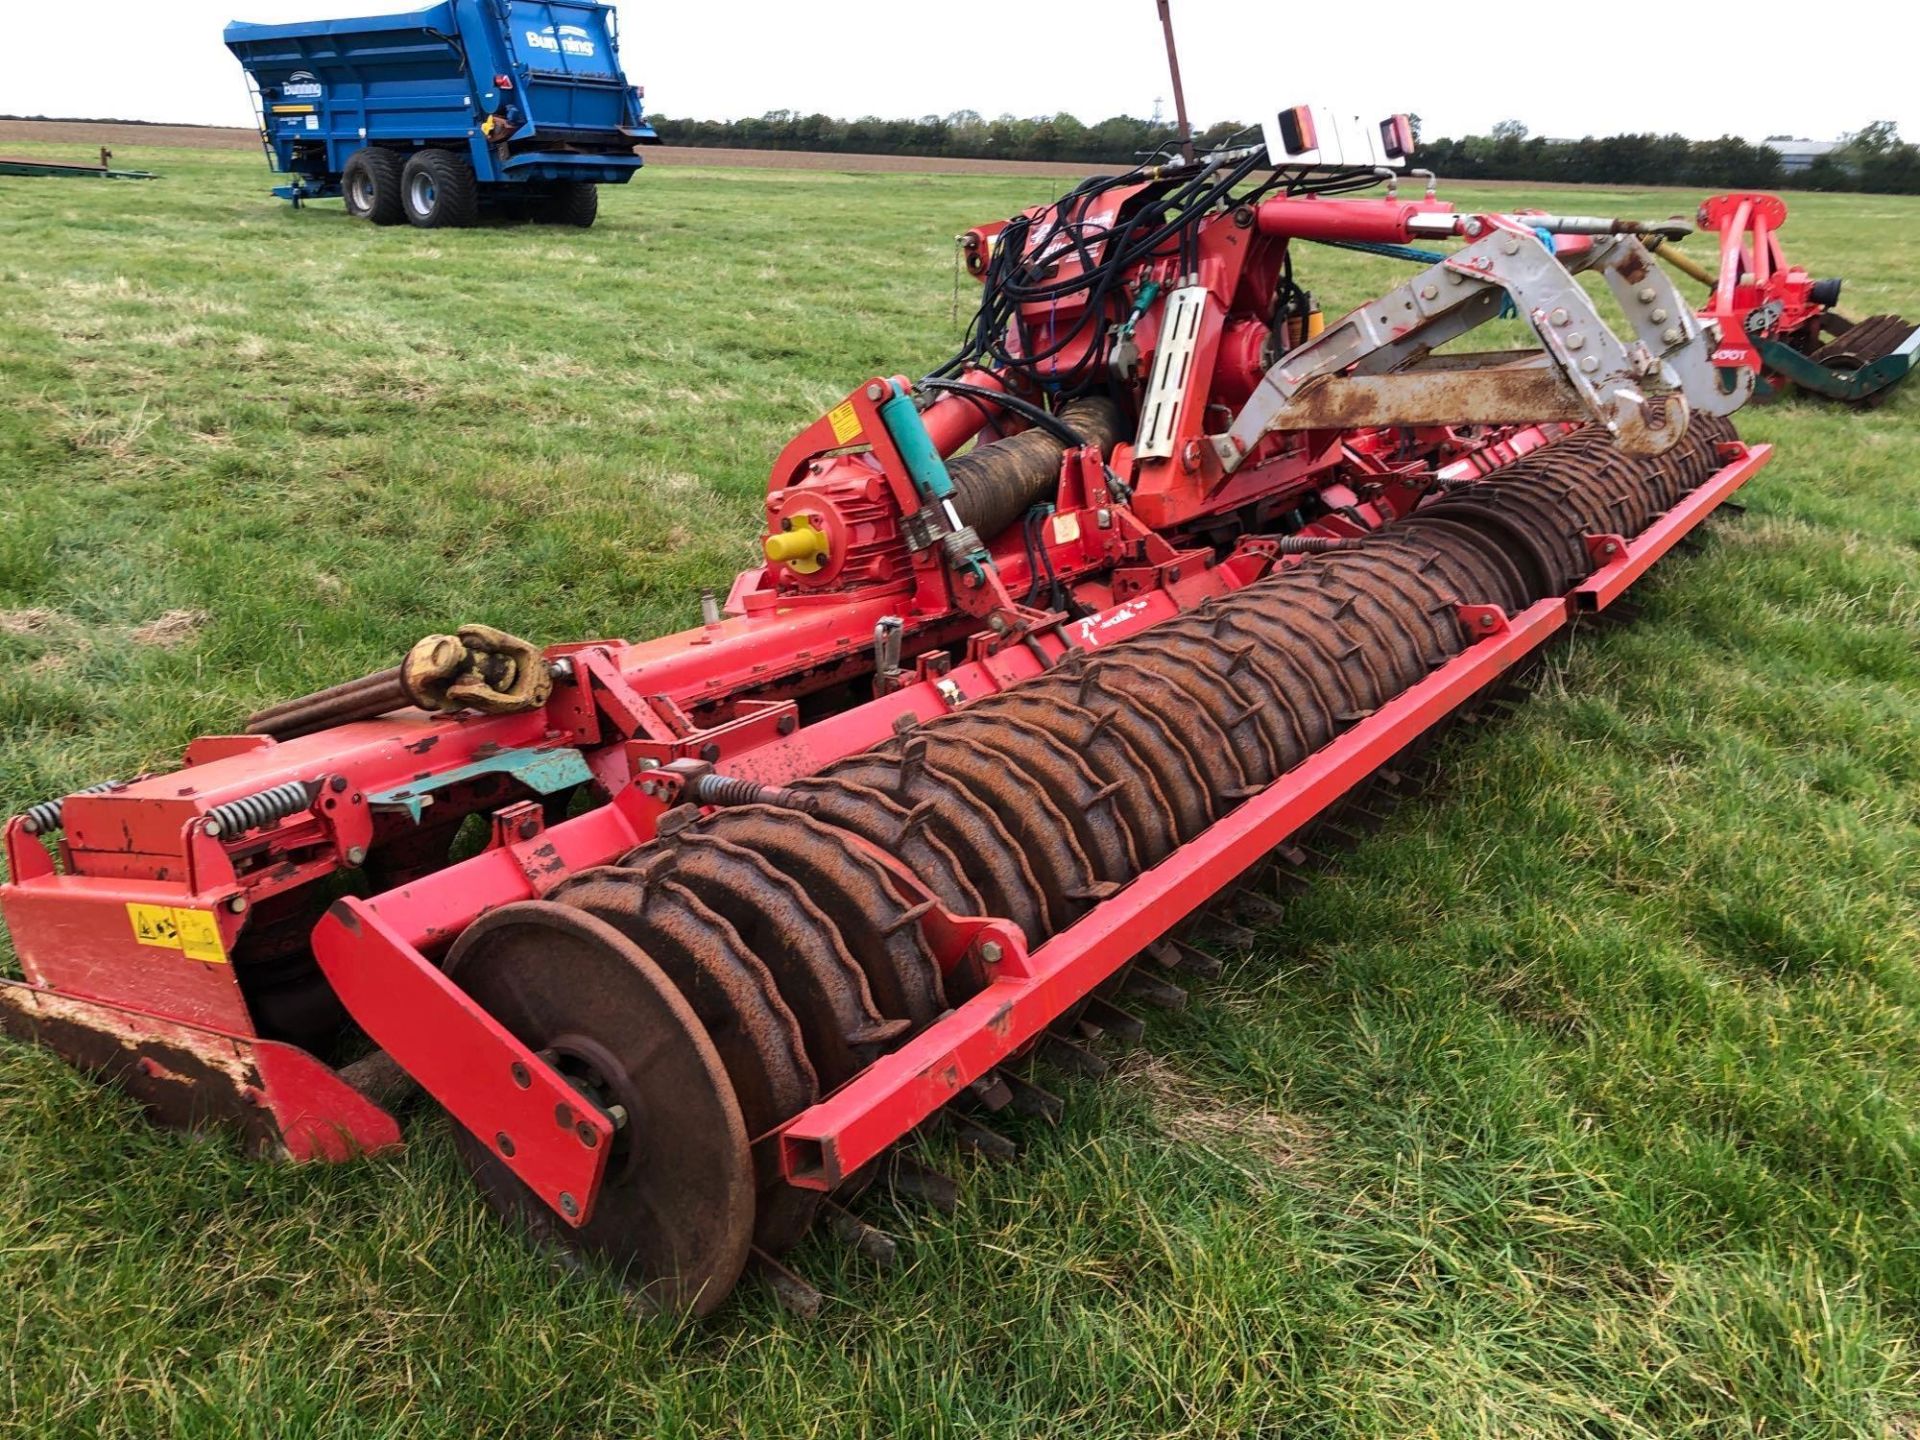 2008 Kverneland NGS/601/F40 6m hydraulic folding power harrow with rear Kerner packer and rear linka - Image 4 of 12